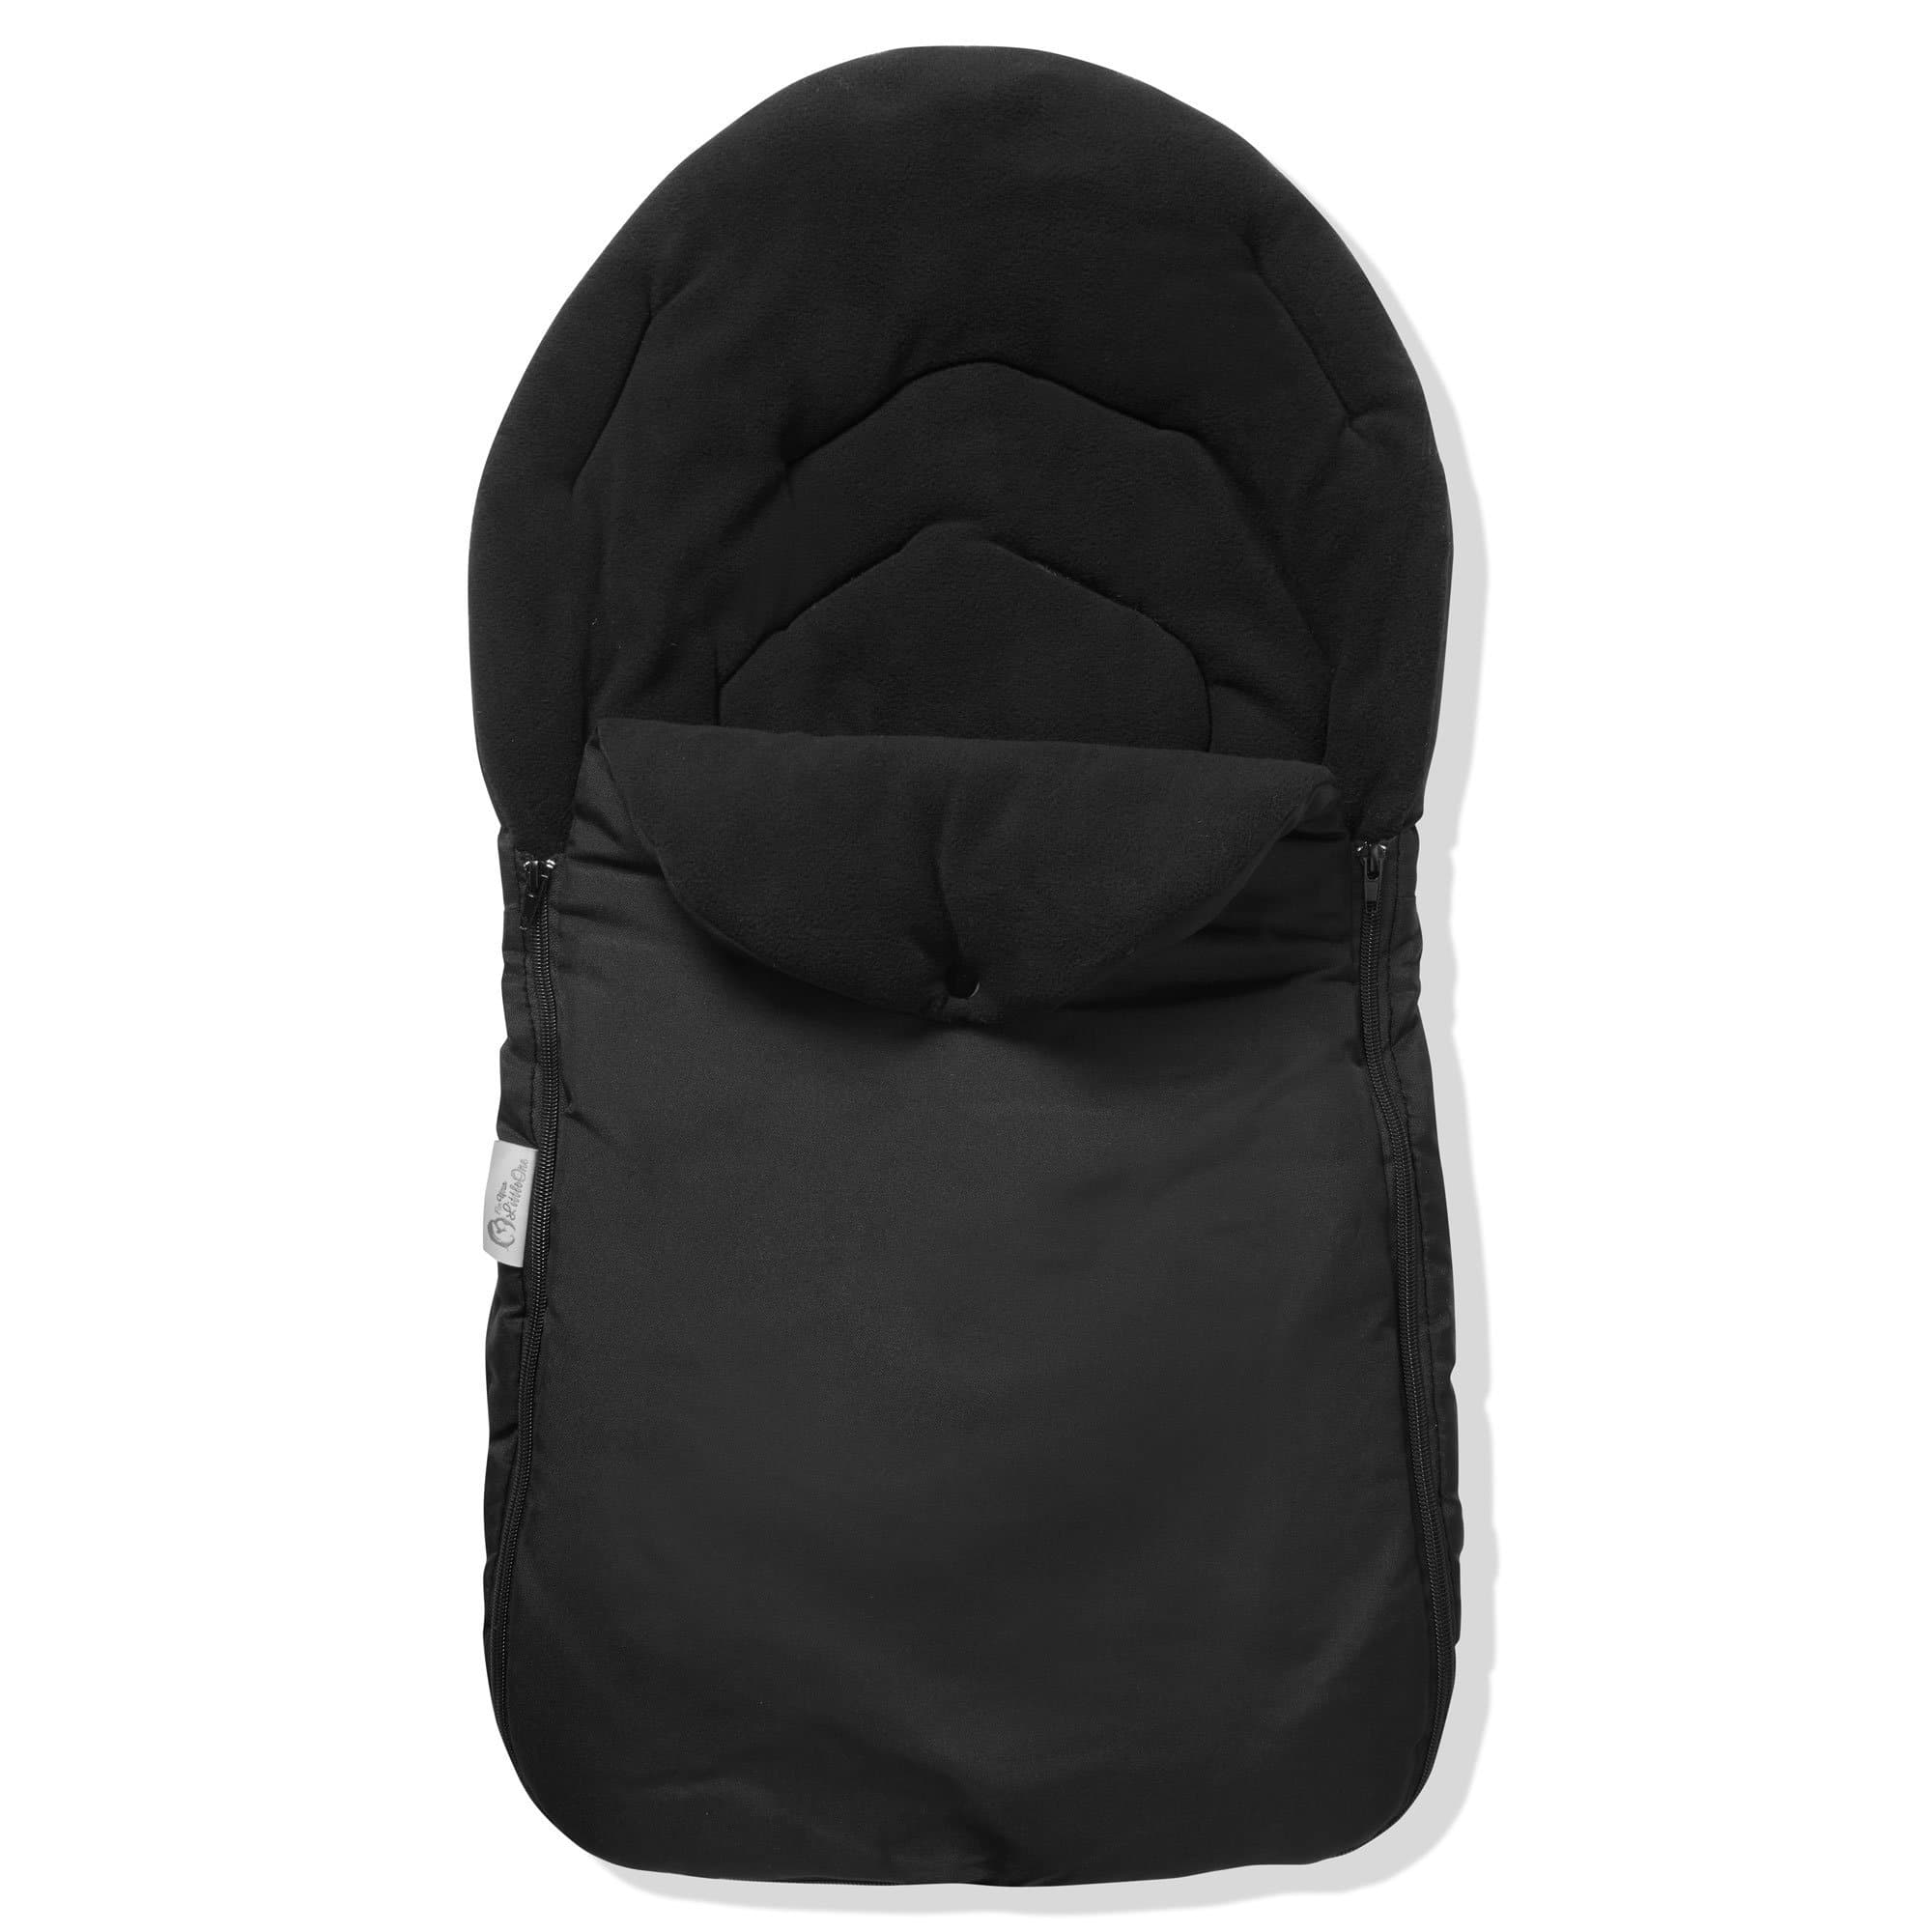 Car Seat Footmuff / Cosy Toes Compatible with Britax - Black / Fits All Models | For Your Little One